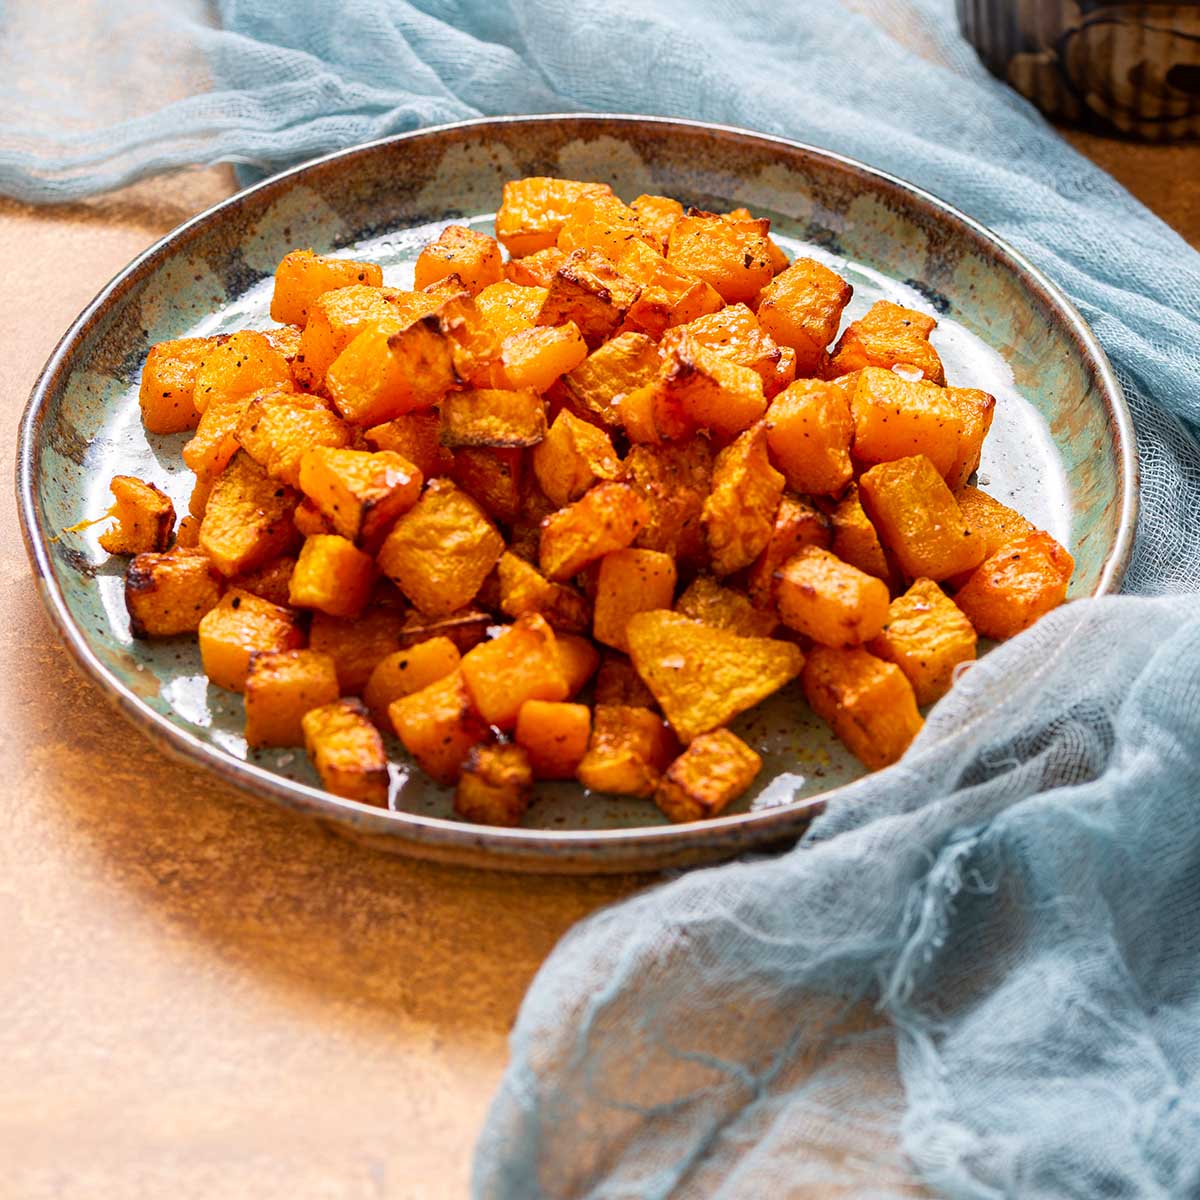 a side view of a plate of roasted butternut squash